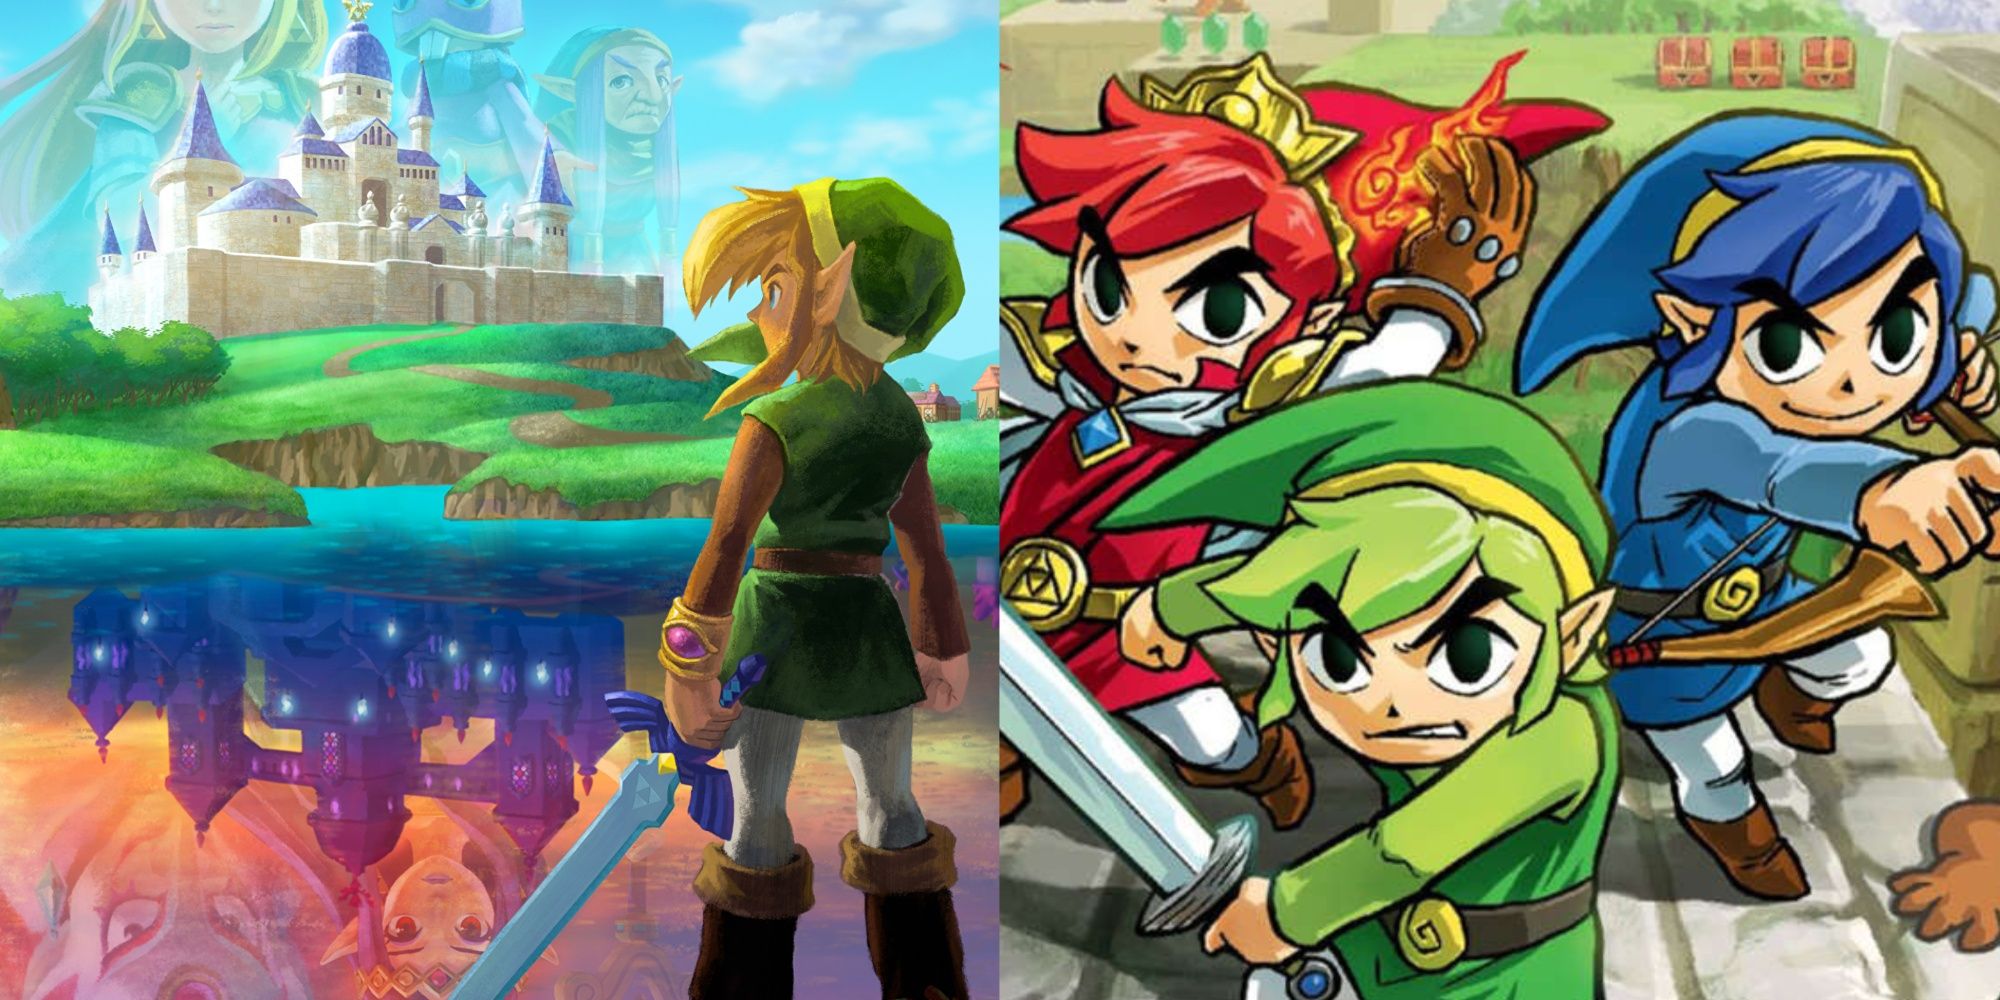 Split image of official artwork of Link in A Link Between Worlds and three Links in Tri Force Heroes